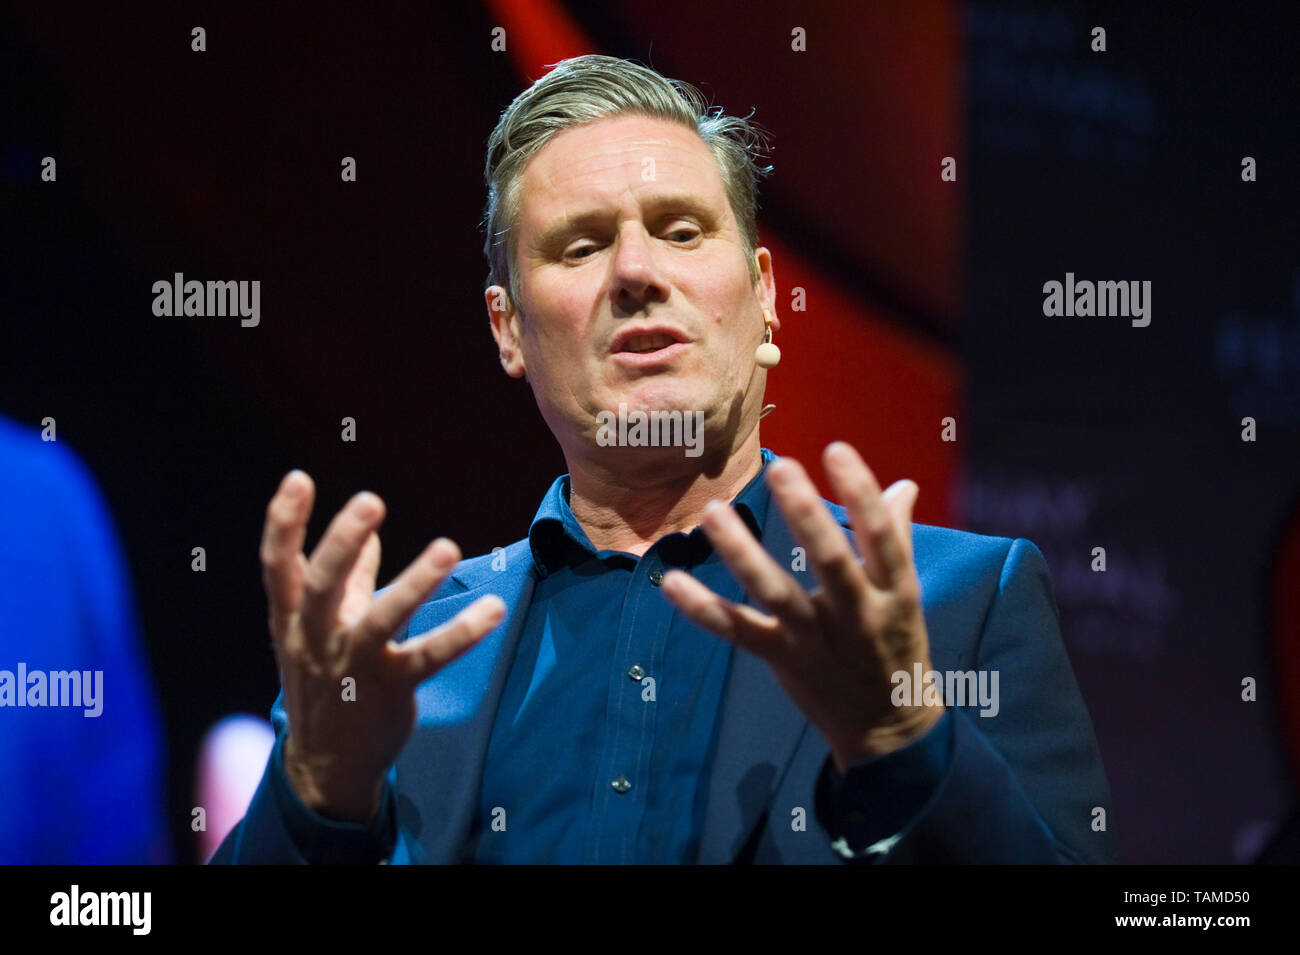 Sir Keir Starmer MP British Labour Party politician and barrister speaking on stage at Hay Festival Hay-on-Wye Powys Wales UK Stock Photo